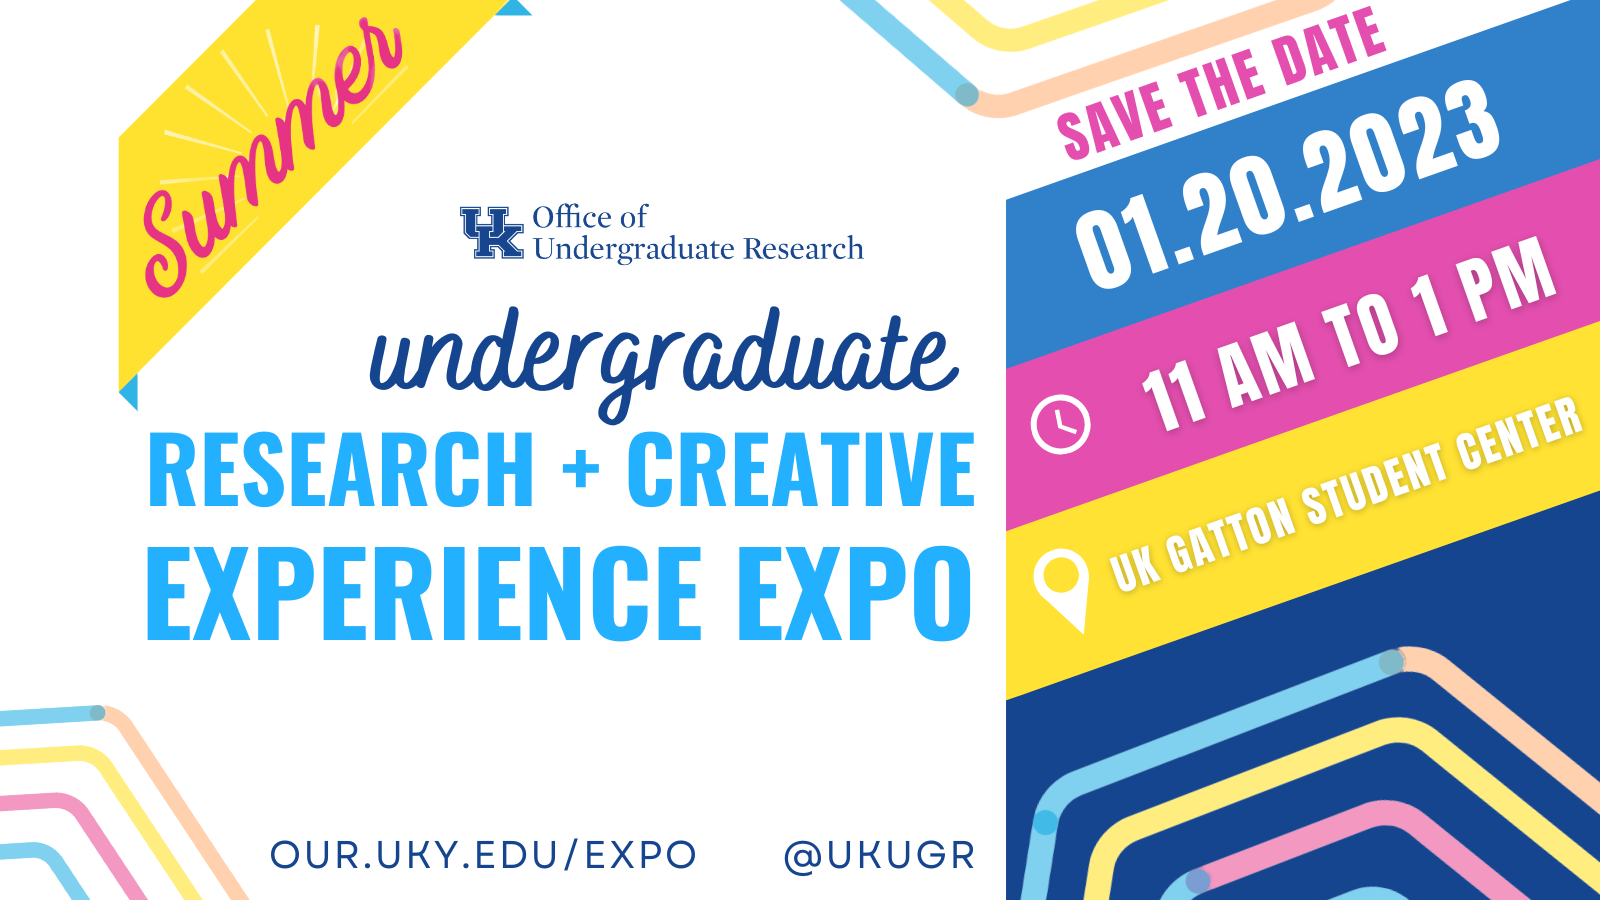 Summer 2023 research creative experience expo University of Kentucky